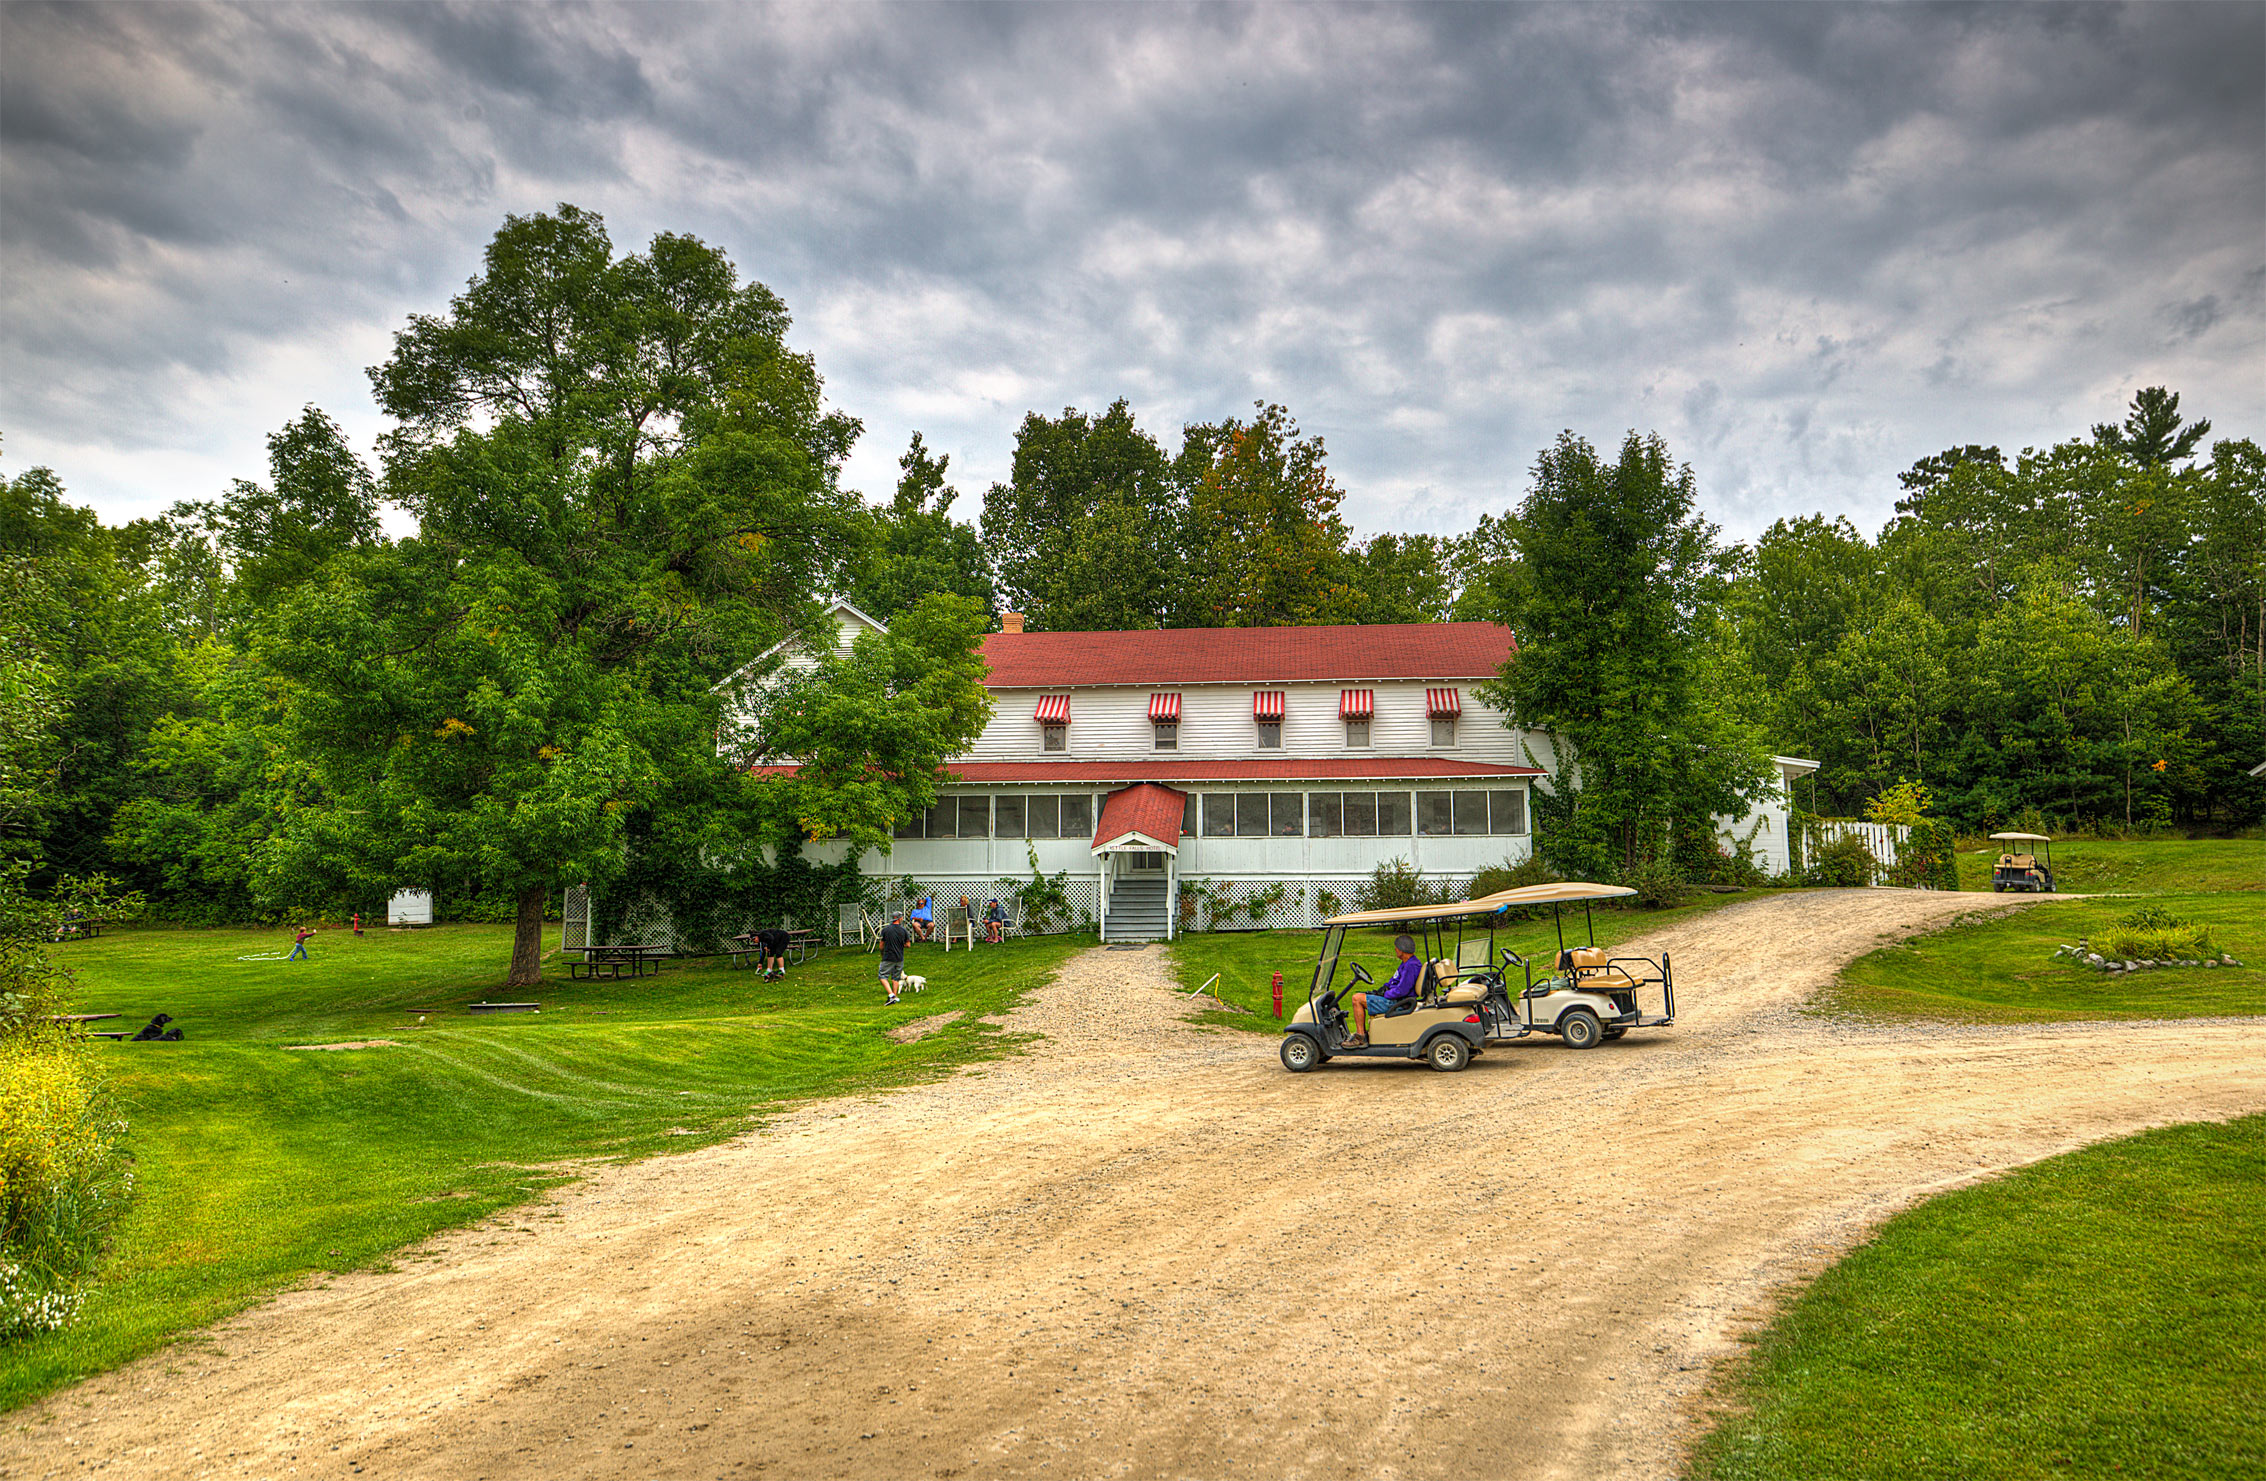 The Kettle Falls Hotel in Voyageurs National Park